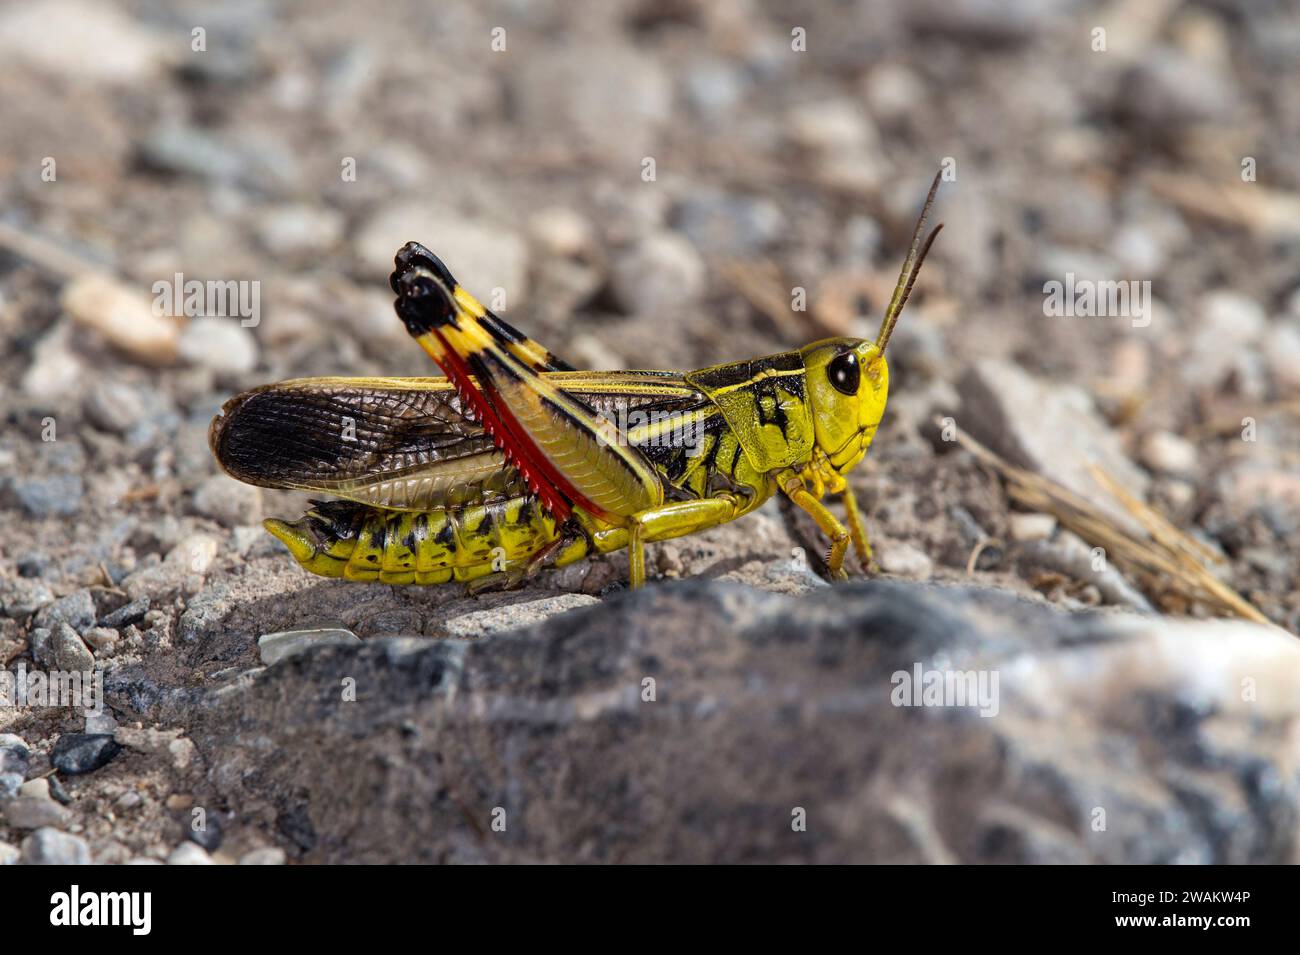 Large banded grasshopper (Arcyptera fusca), male,  a Short-horned grasshopper from the Acrididae family, Valais, Switzerland Stock Photo